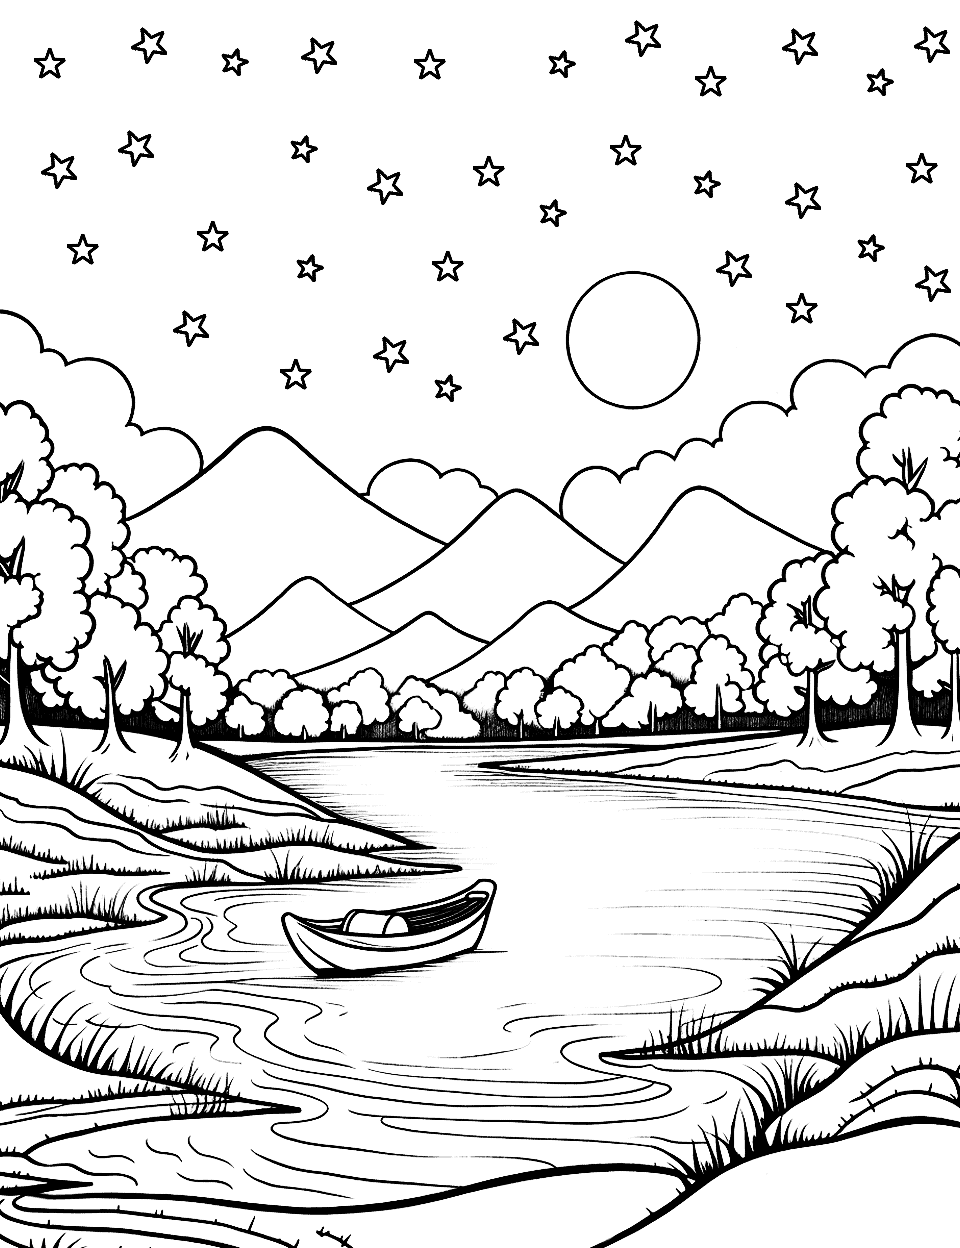 Moonlit River Canoe Nature Coloring Page - A canoe floating down a gentle river under a starry sky with a full moon.